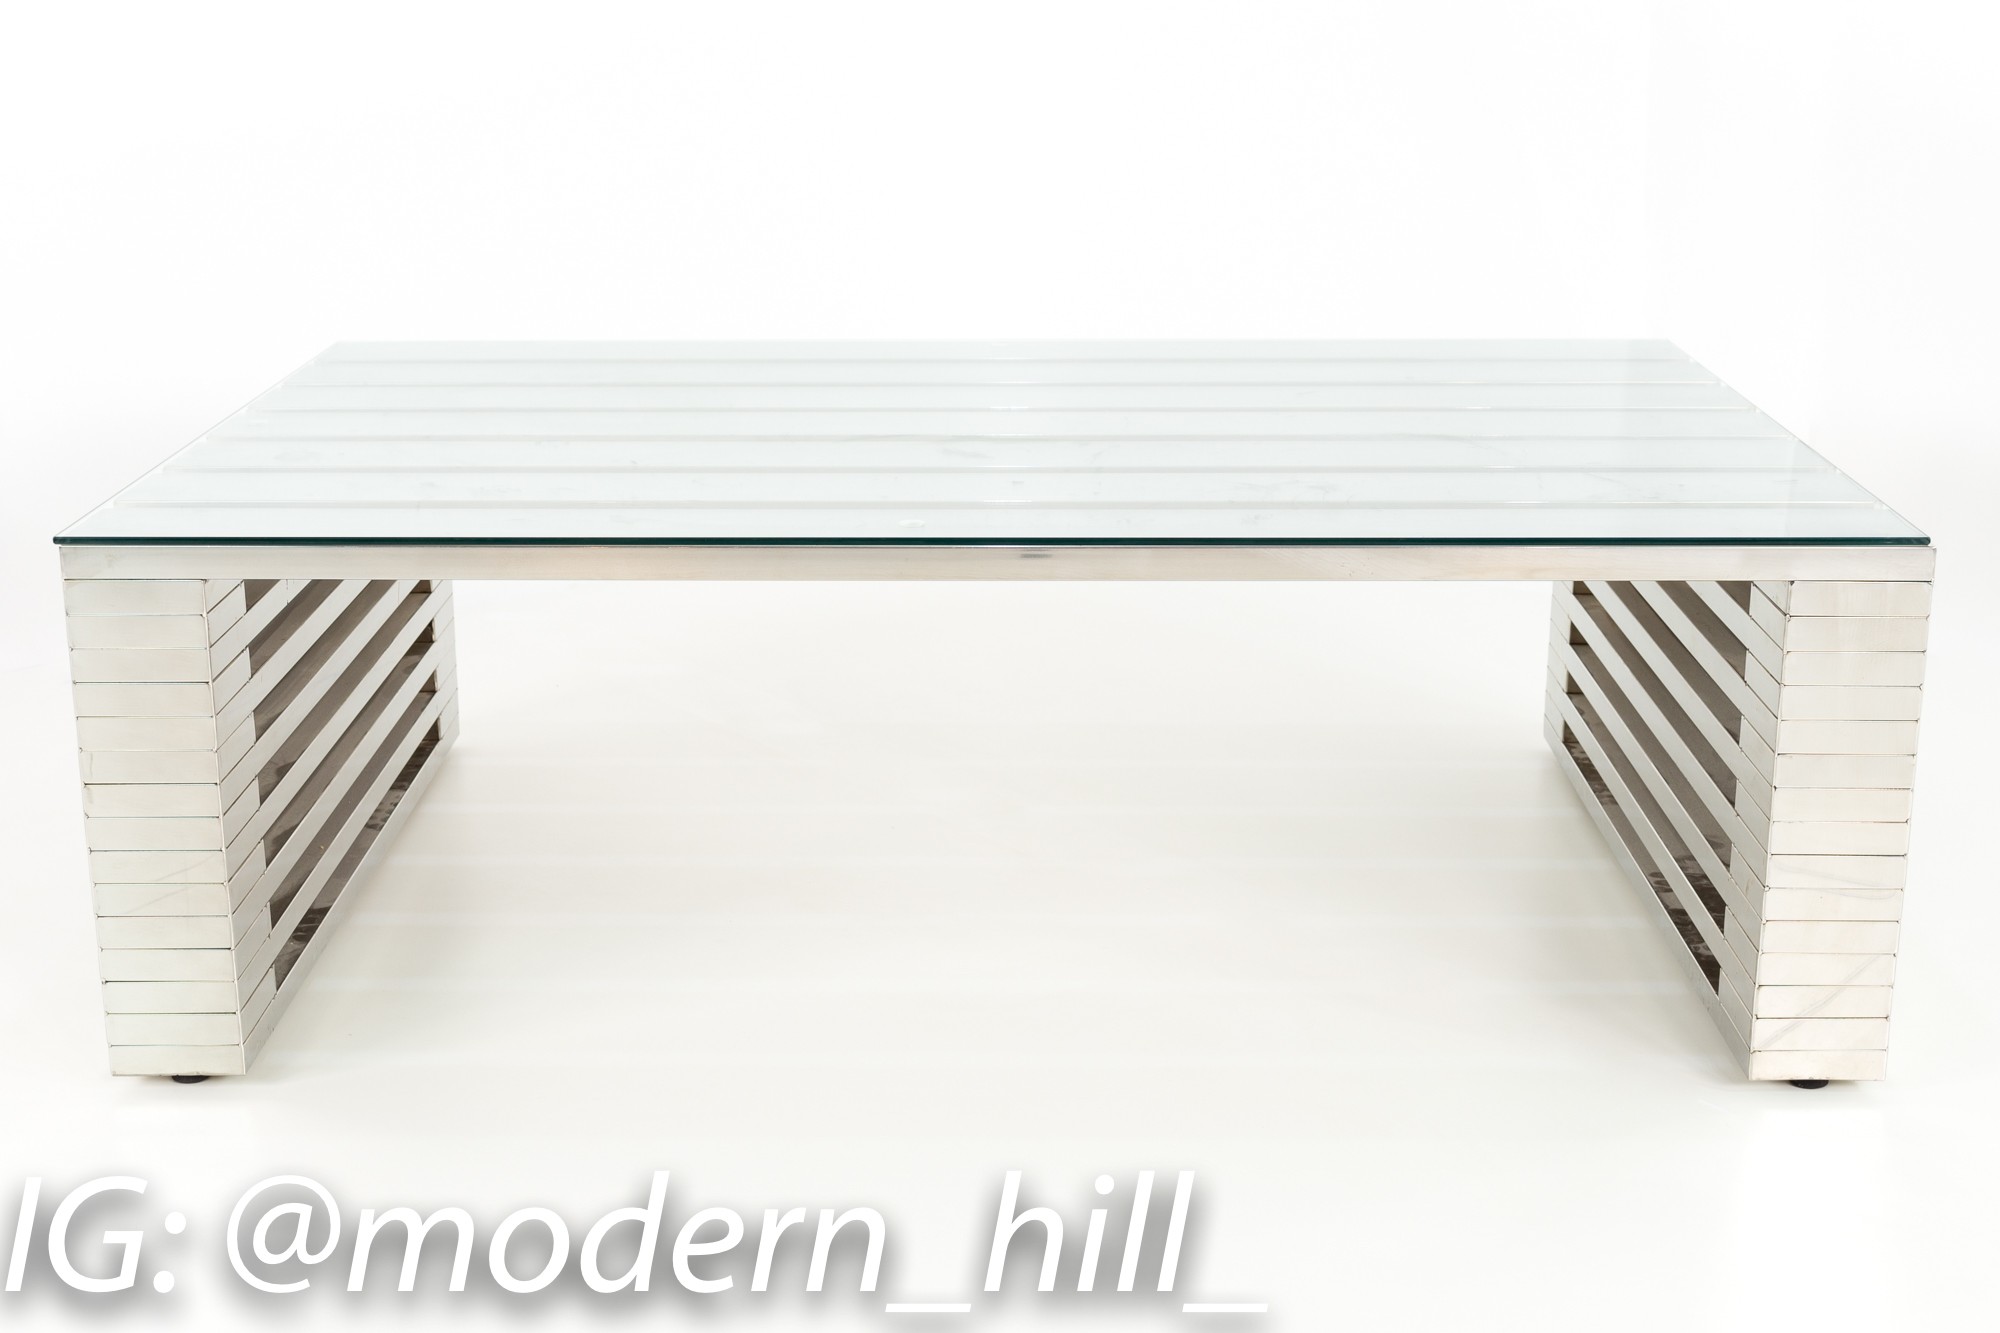 Timothy Oulton Zazenne Mid Century Modern Steel and Glass Coffee Table